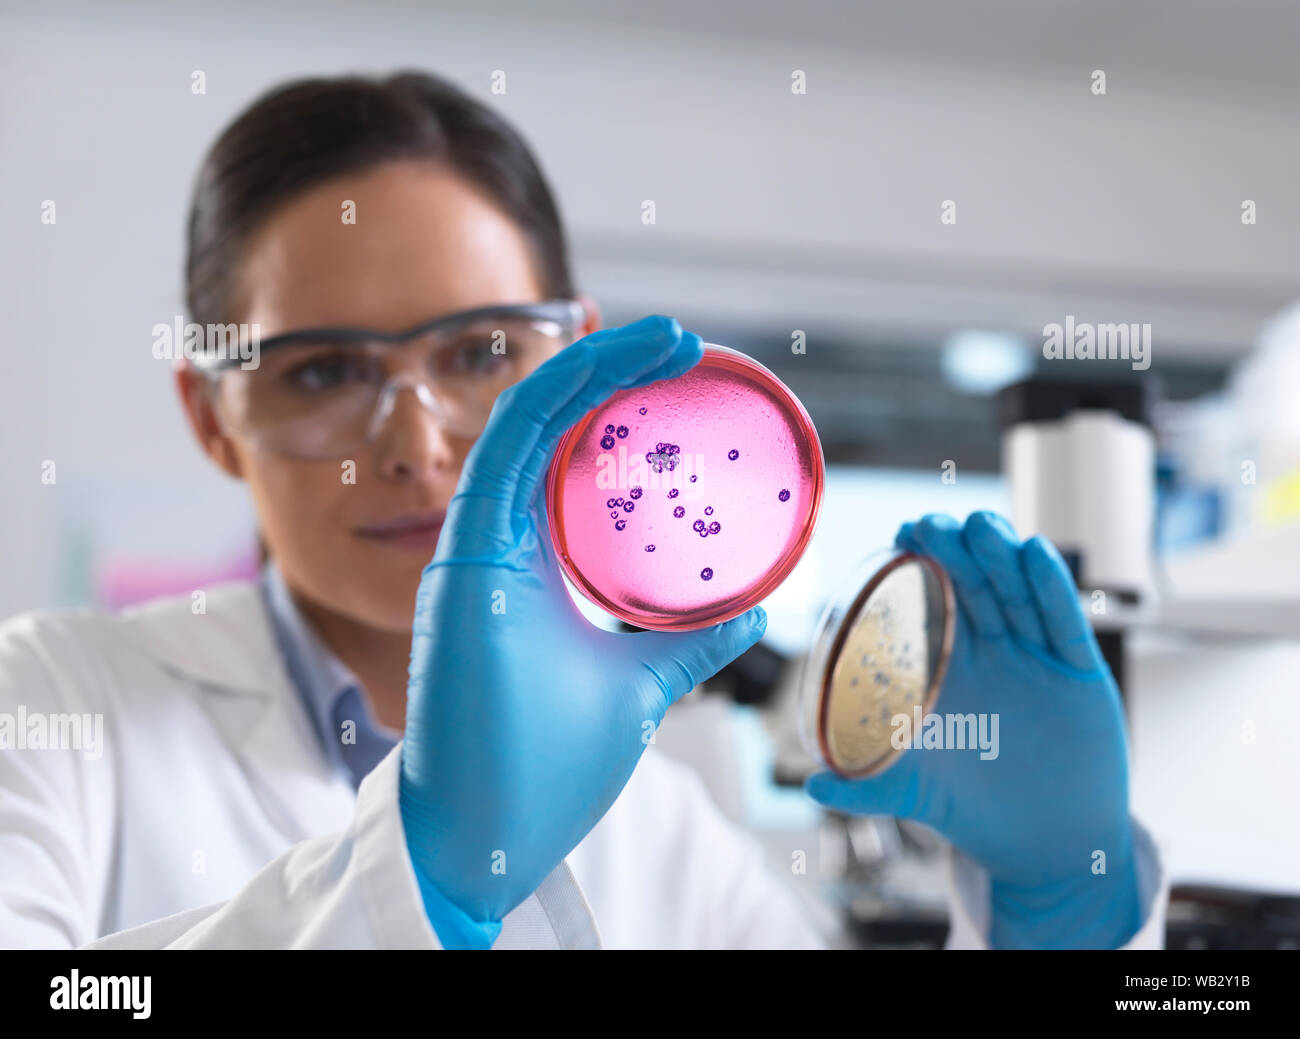 Microbiology research. Scientist examining bacterial cultures growing in petri dishes. Stock Photo